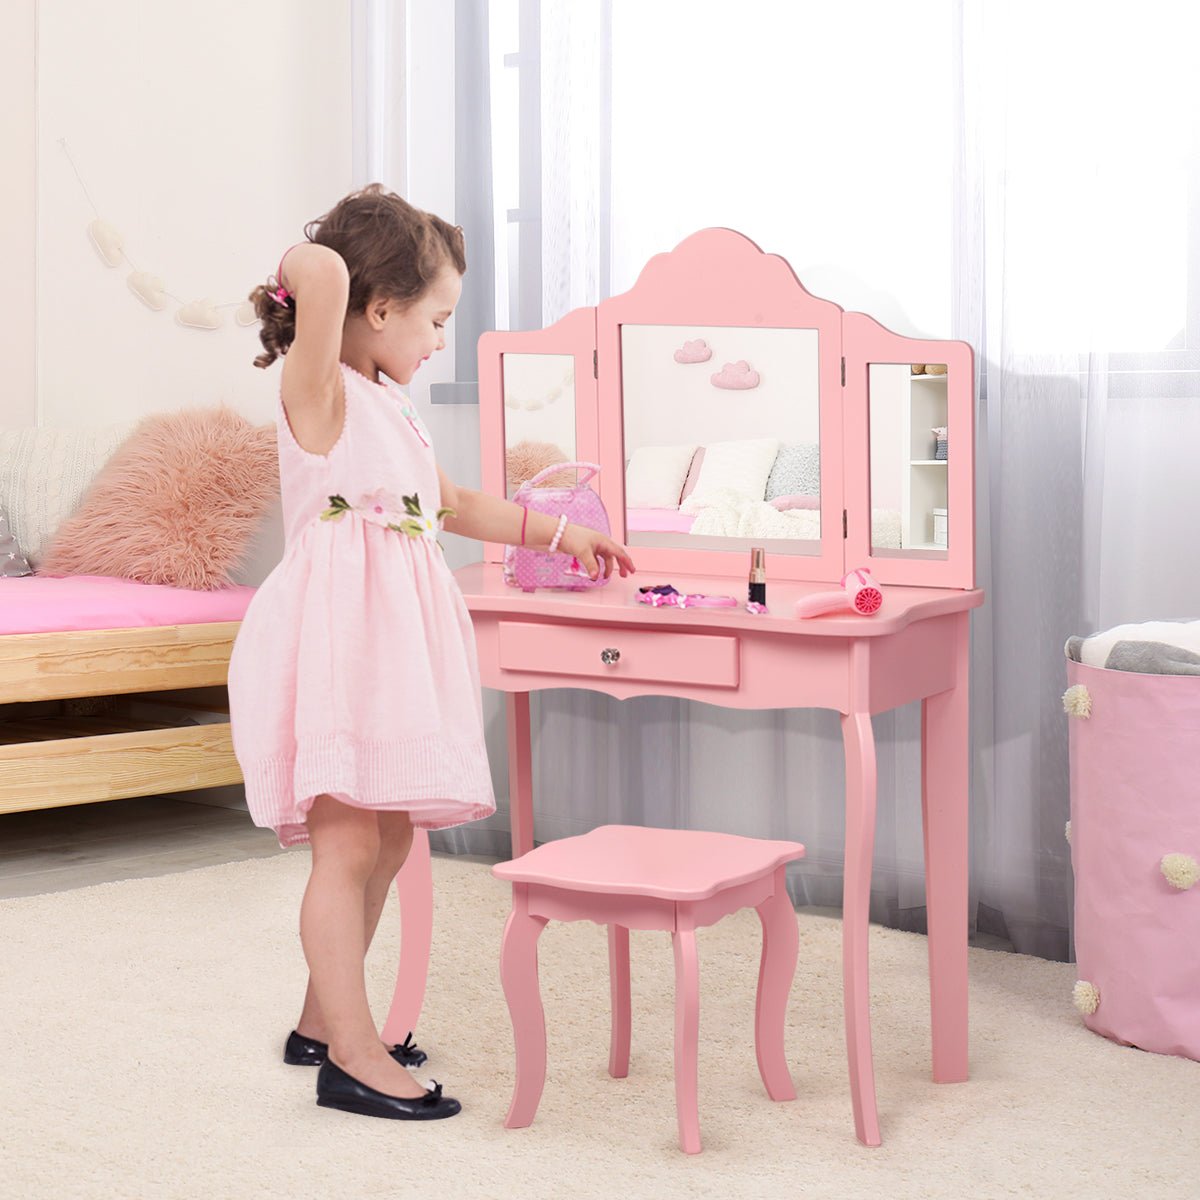 Children's Dressing Table & Stool Set - Mirror Magic for Ages 3-7